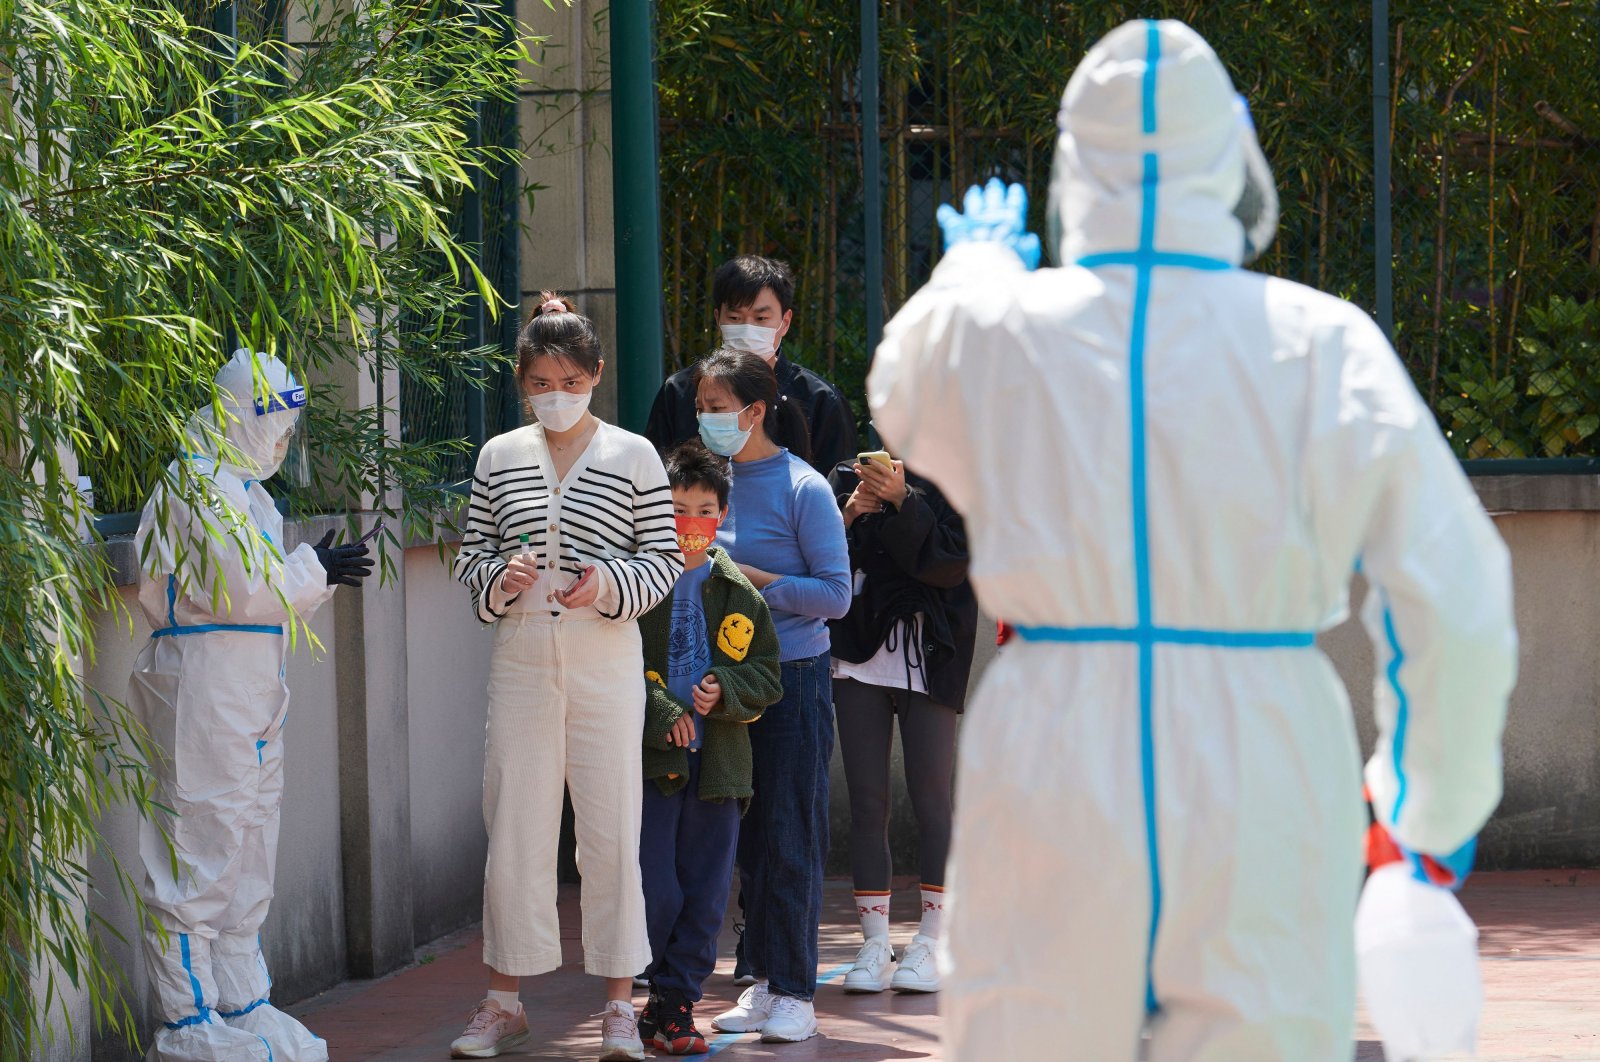 Community volunteers wearing personal protective equipment guide residents queuing to get tested for COVID-19 in a compound during a lockdown in Pudong district, Shanghai, China, April 17, 2022. (AFP Photo)